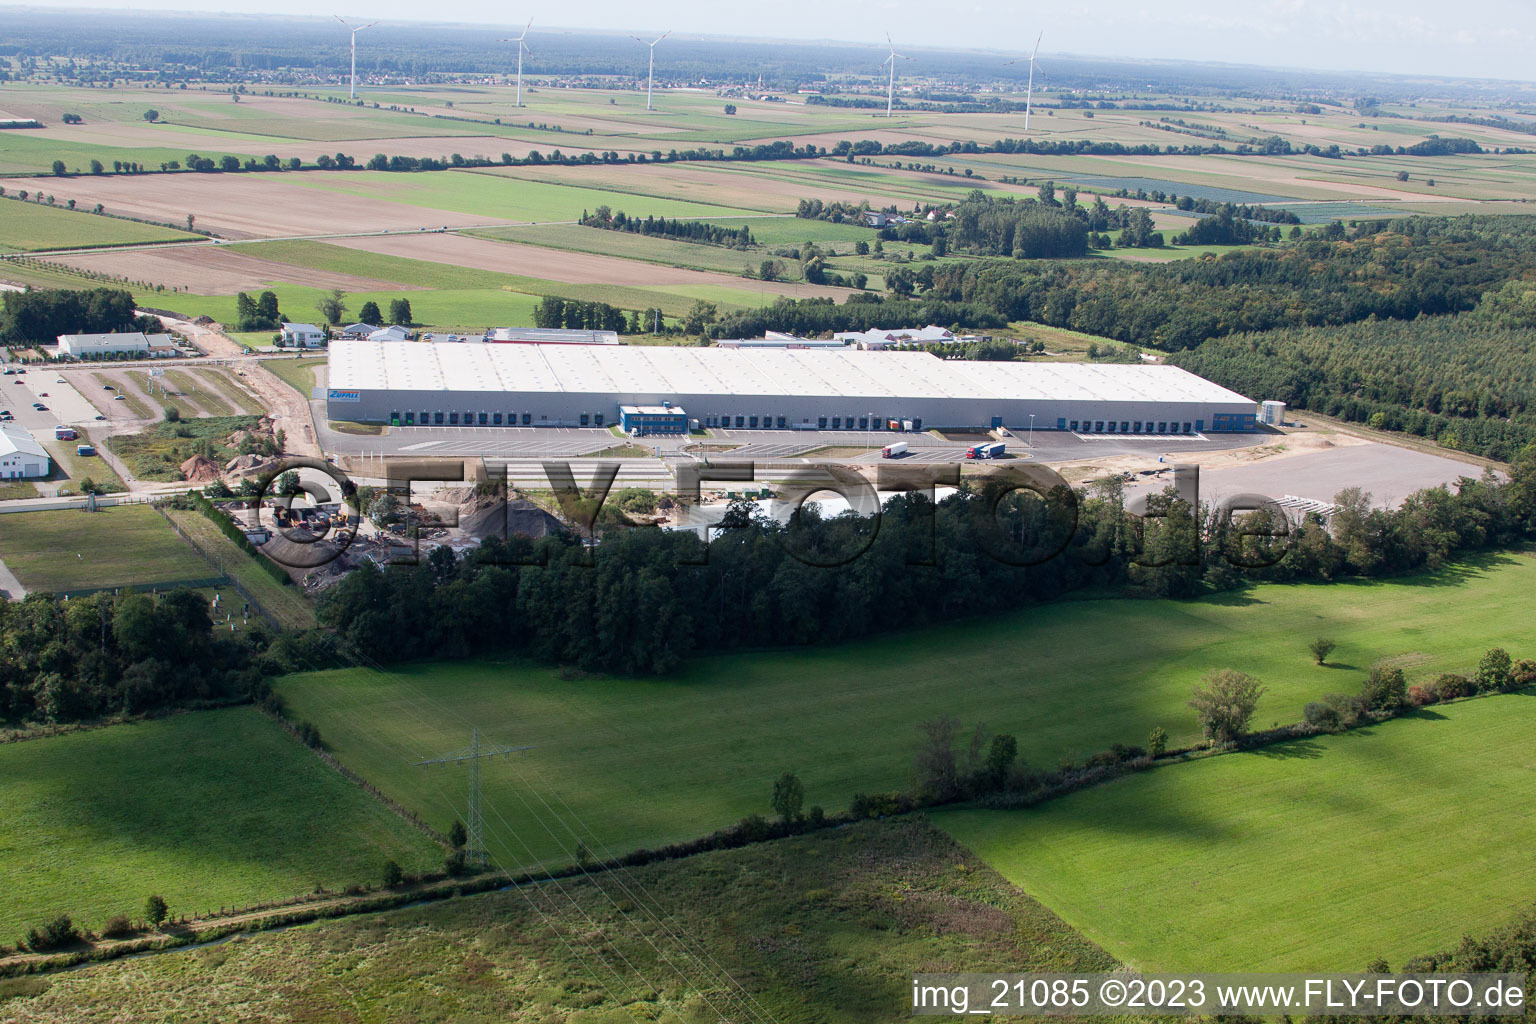 Aerial photograpy of Coincidence logistics center in the district Minderslachen in Kandel in the state Rhineland-Palatinate, Germany